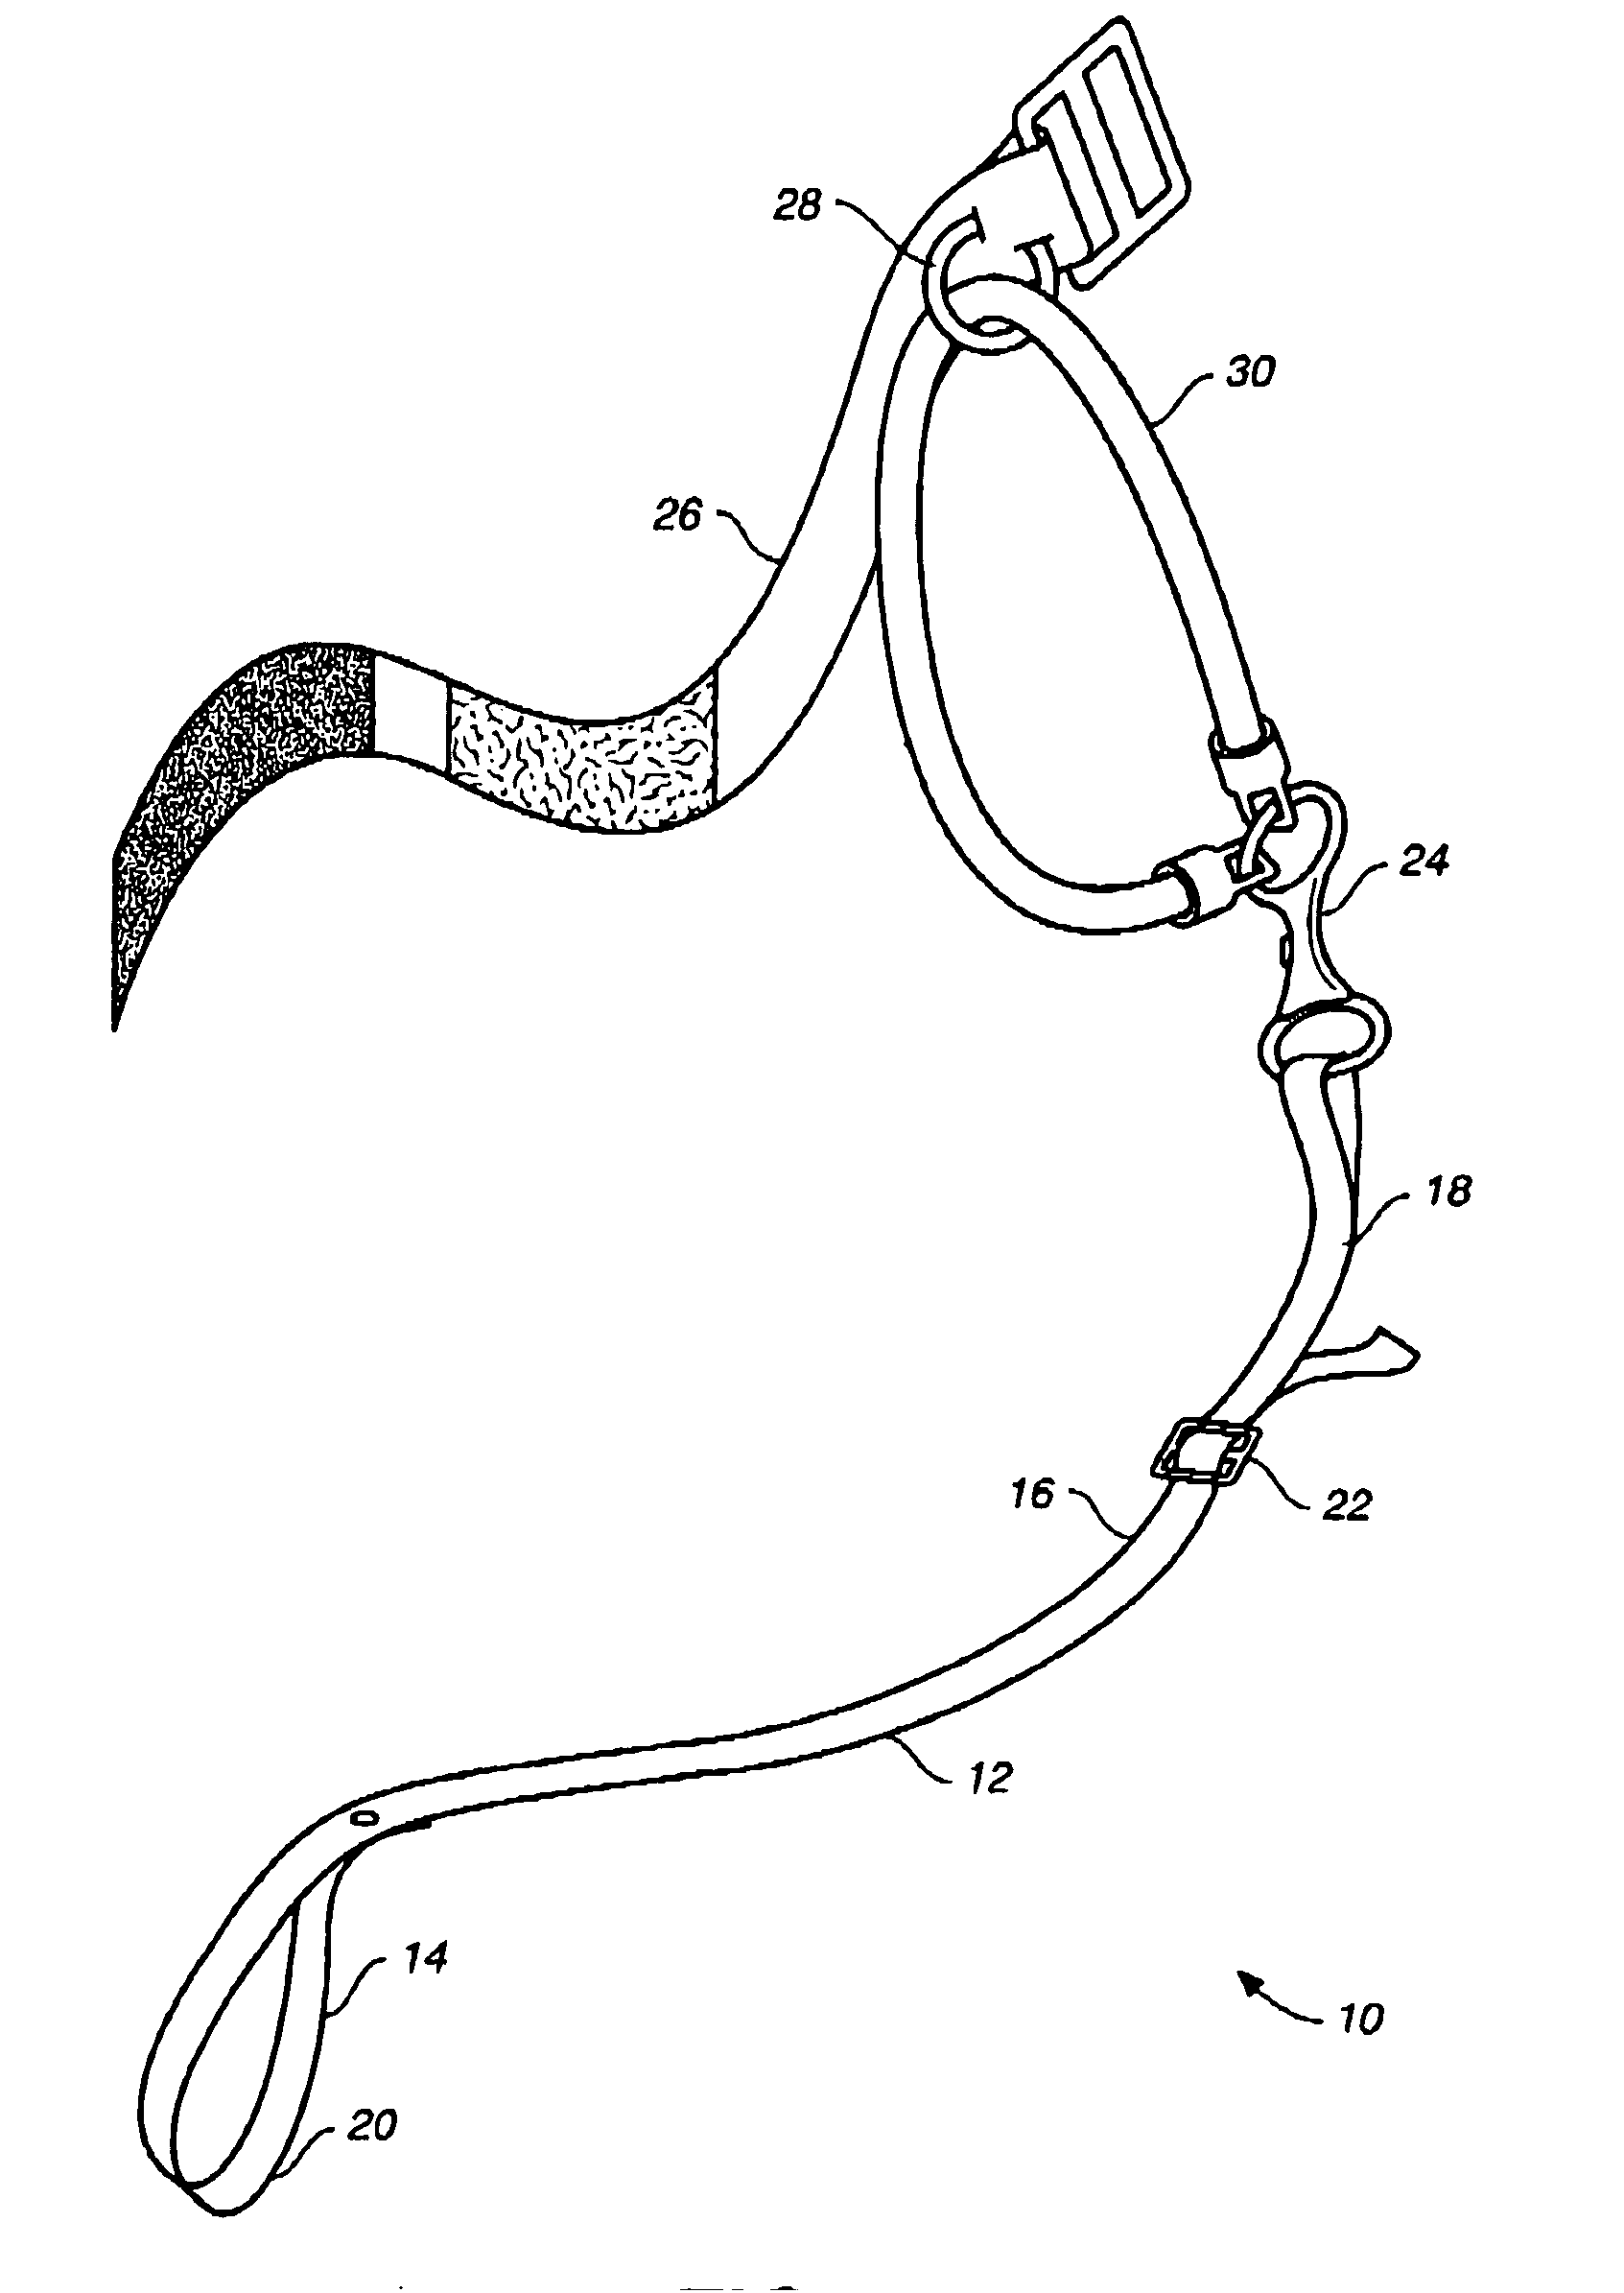 Method and apparatus for performing stretching and strengthening exercises